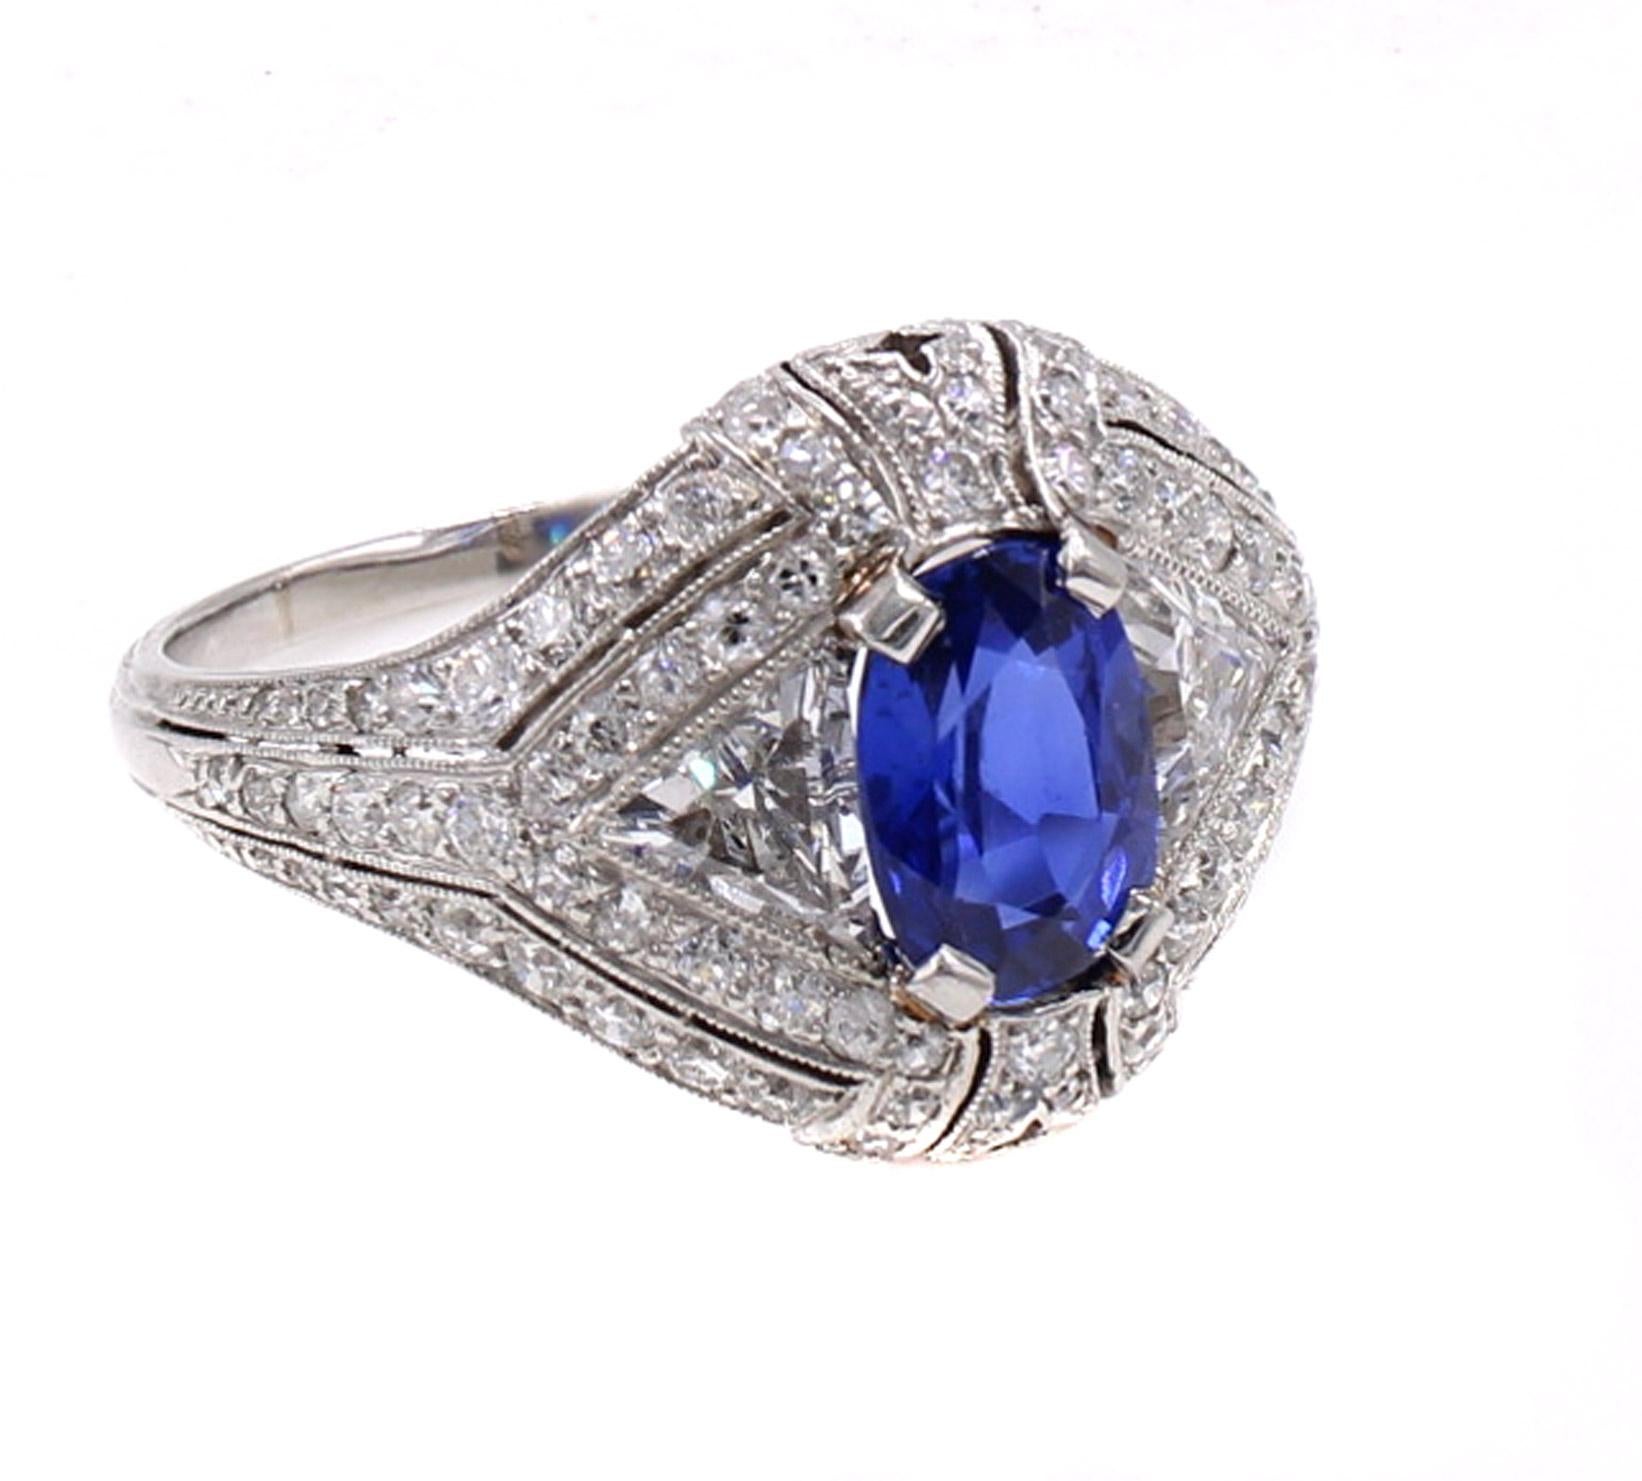 This unique Tiffany & Co. Art Deco ring from ca 1925 is beautifully designed and amazingly hand crafted, to the high standards of early Tiffany jewelry. Featuring an oval sapphire approximately 2 carats in weight, with a gorgeous deeply saturated